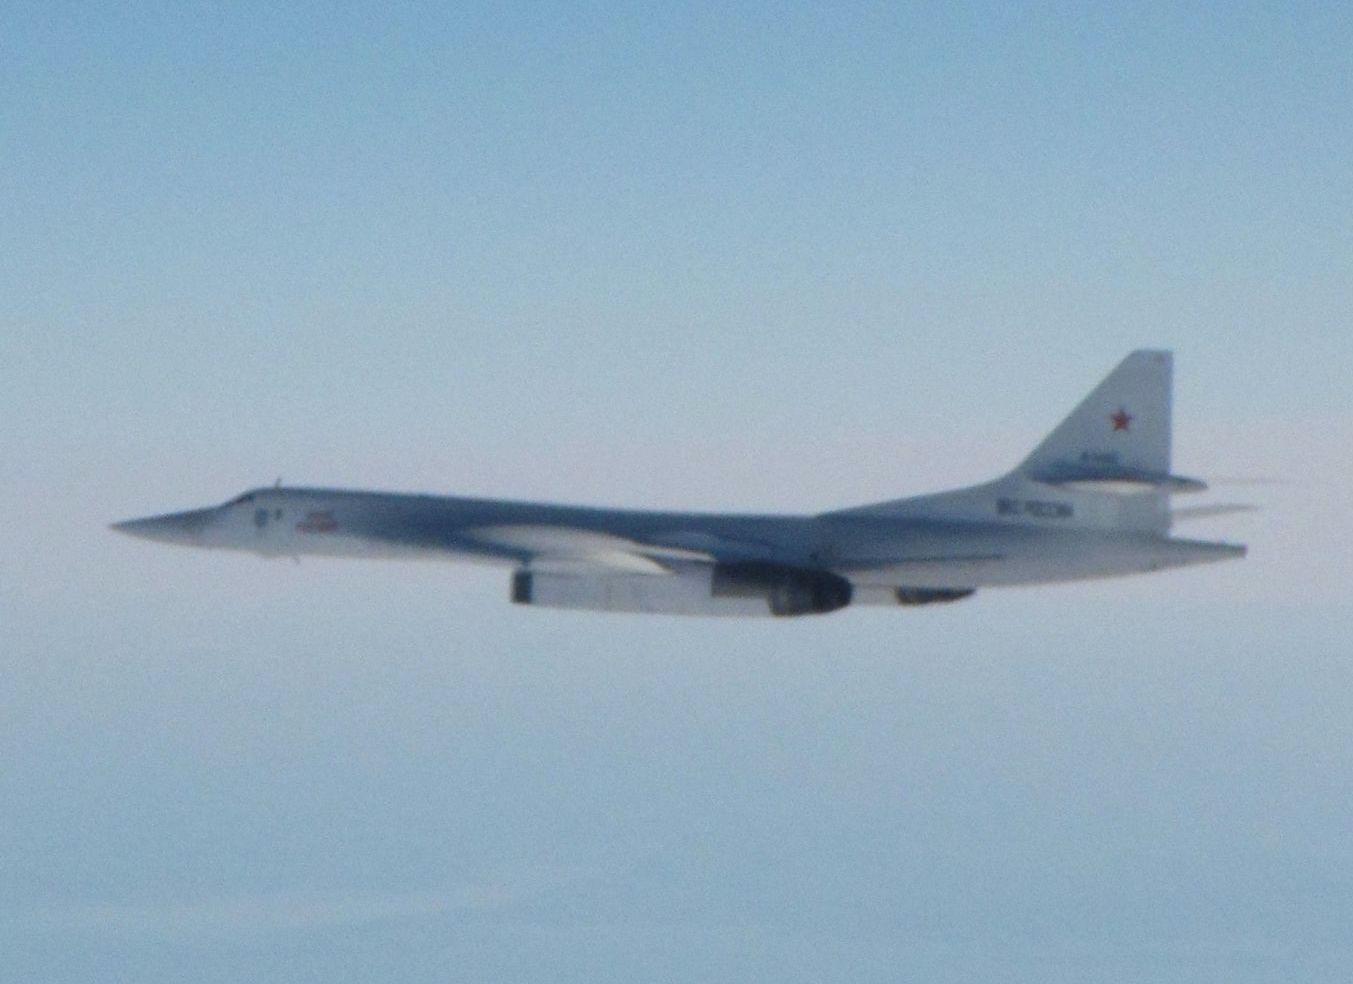 Britain Deploys Fighter Jets To Escort Russian Bombers Near Its Airspace